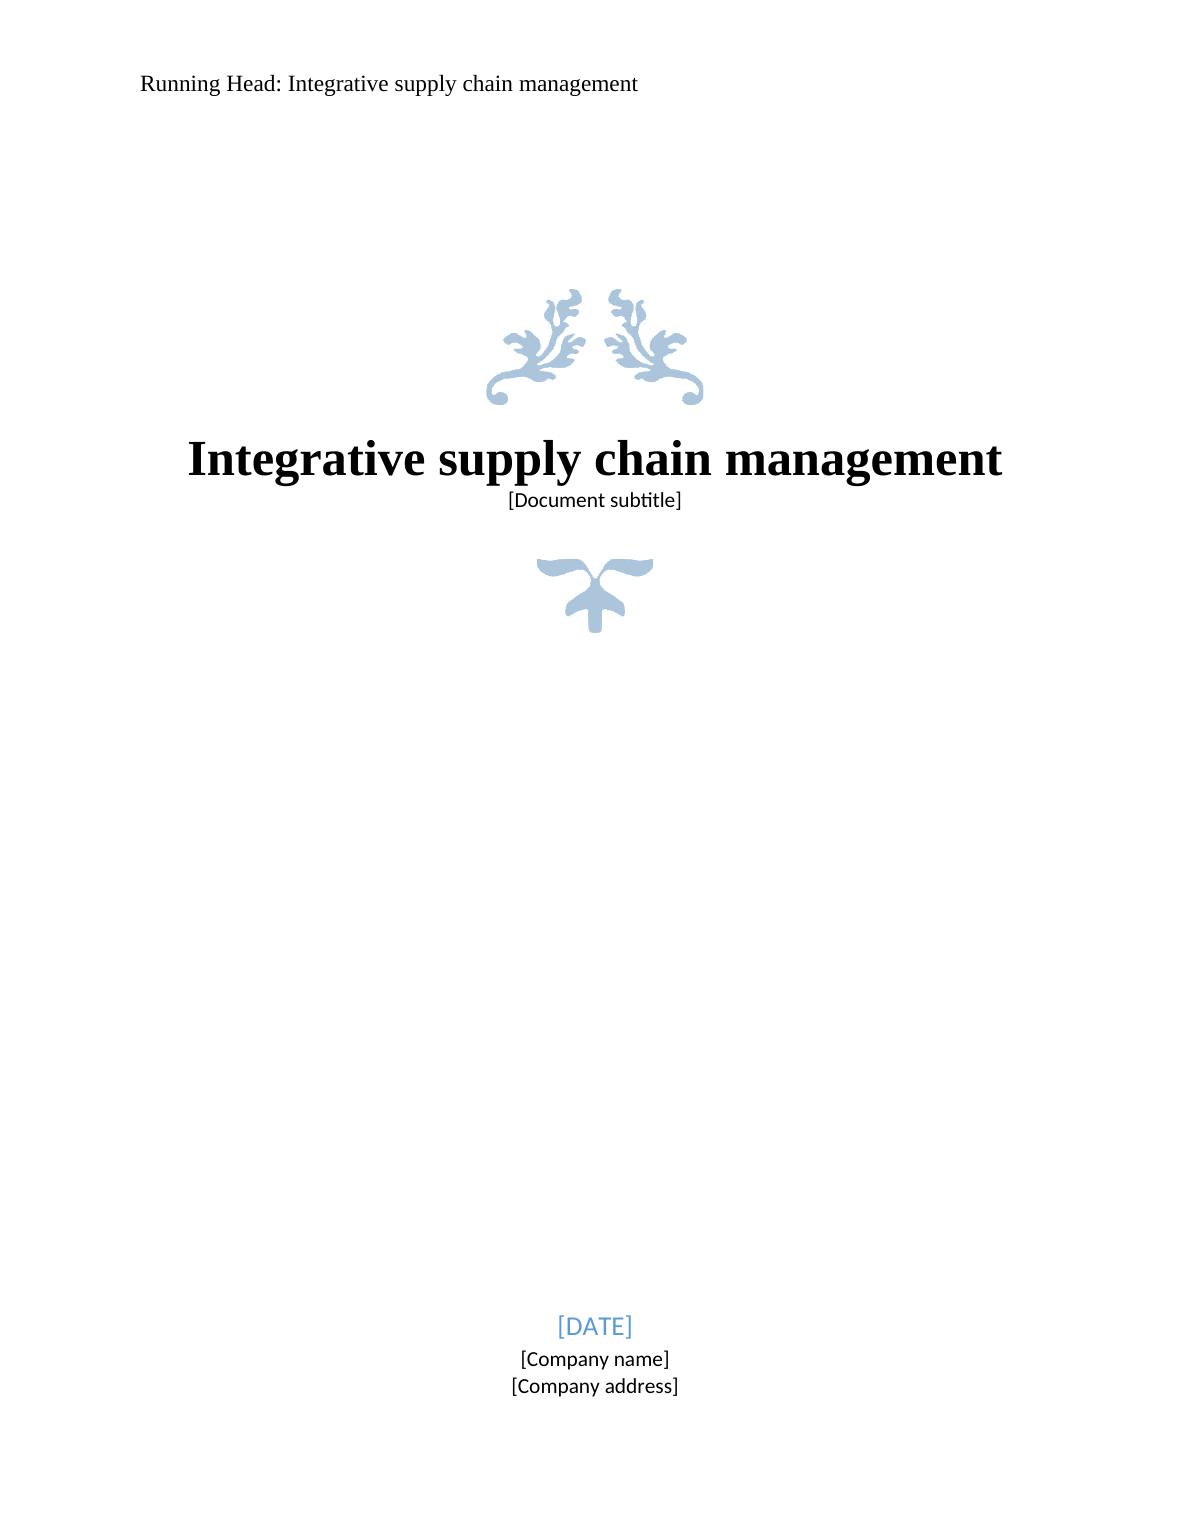 Integrative Supply Chain Management: Impact of Trade Promotion, Managerial Levers, and Facility Operating Costs_1